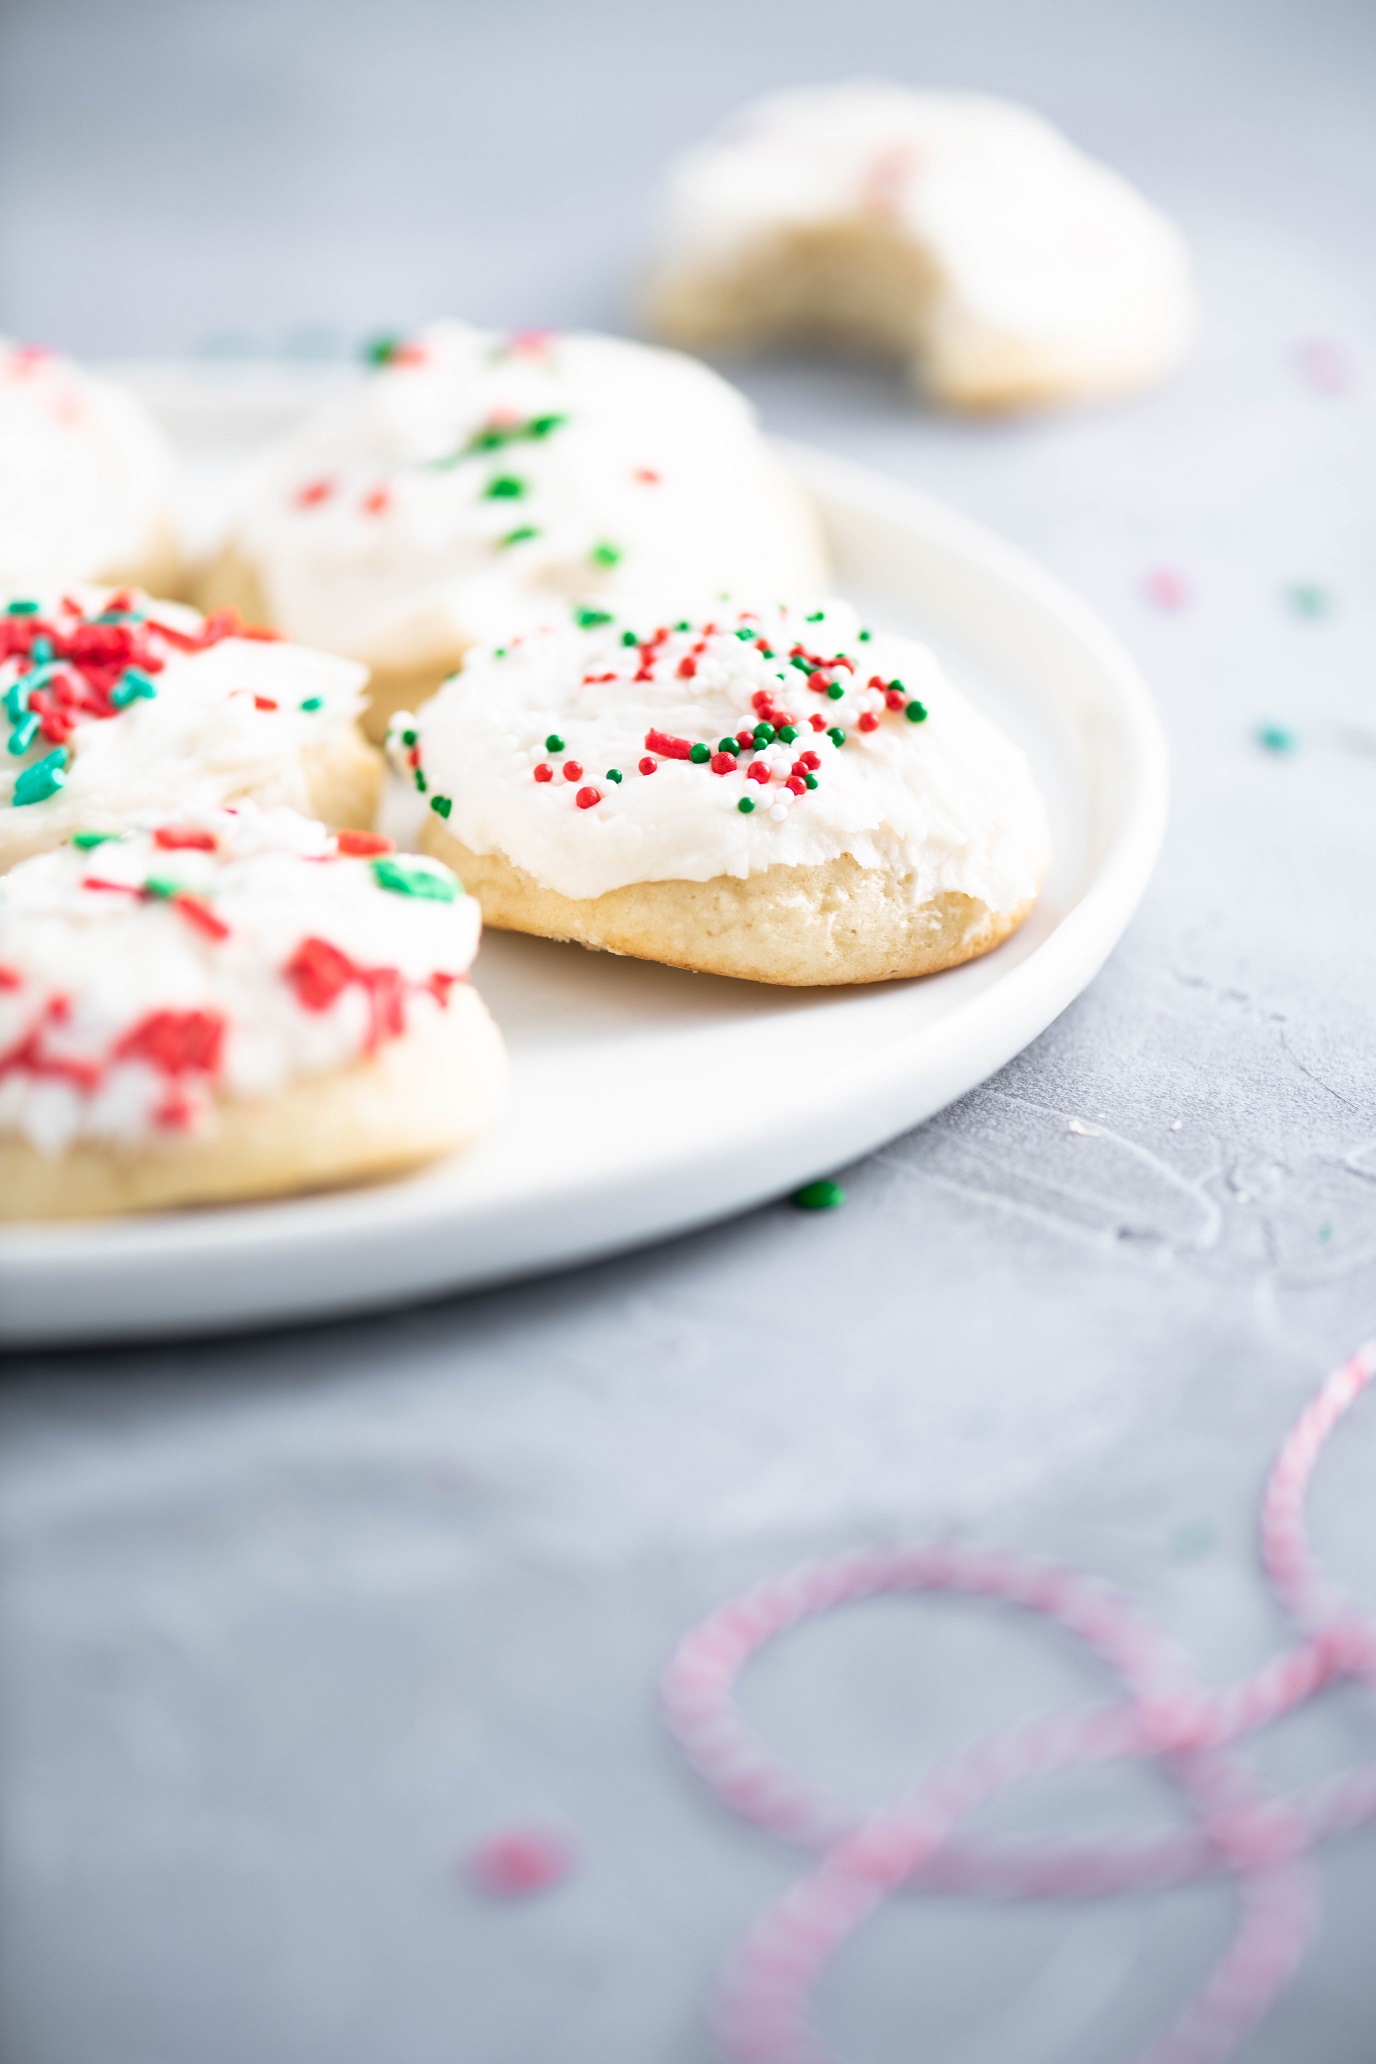 These Italian Christmas cookies are the most tender, fluffy cookie around. With a cake-like texture and a not too sweet buttercream frosting, these are the perfect Christmas cookie. Decorate with festive sprinkles to make them extra fun.